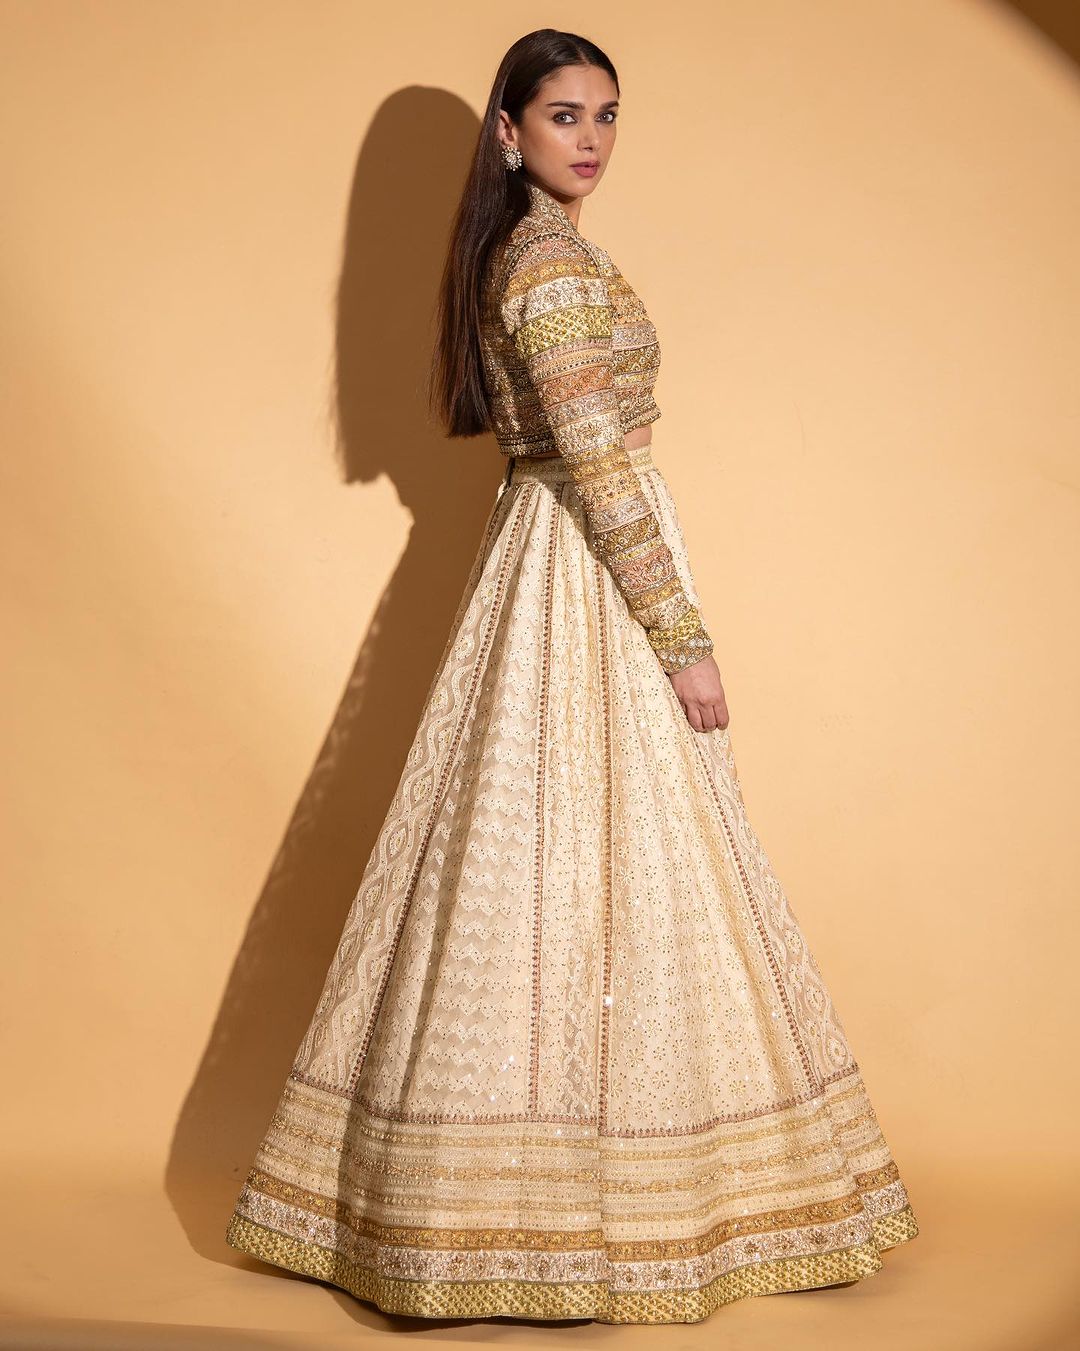 Lehenga but with a twist? Worry not, we have an outfit for you as well. The actress paired a white embroidered lehenga with a crop top